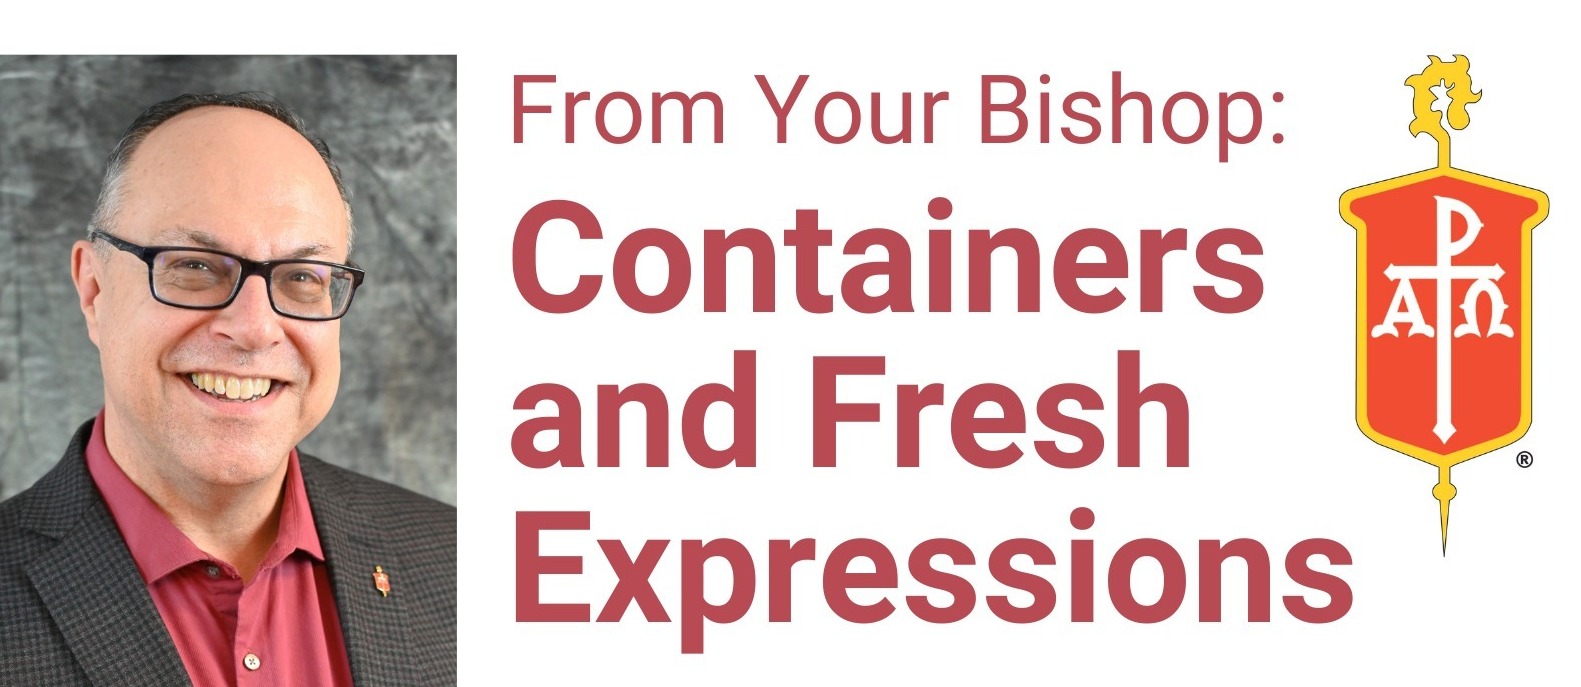 Bishop Containers And Fresh Expressions